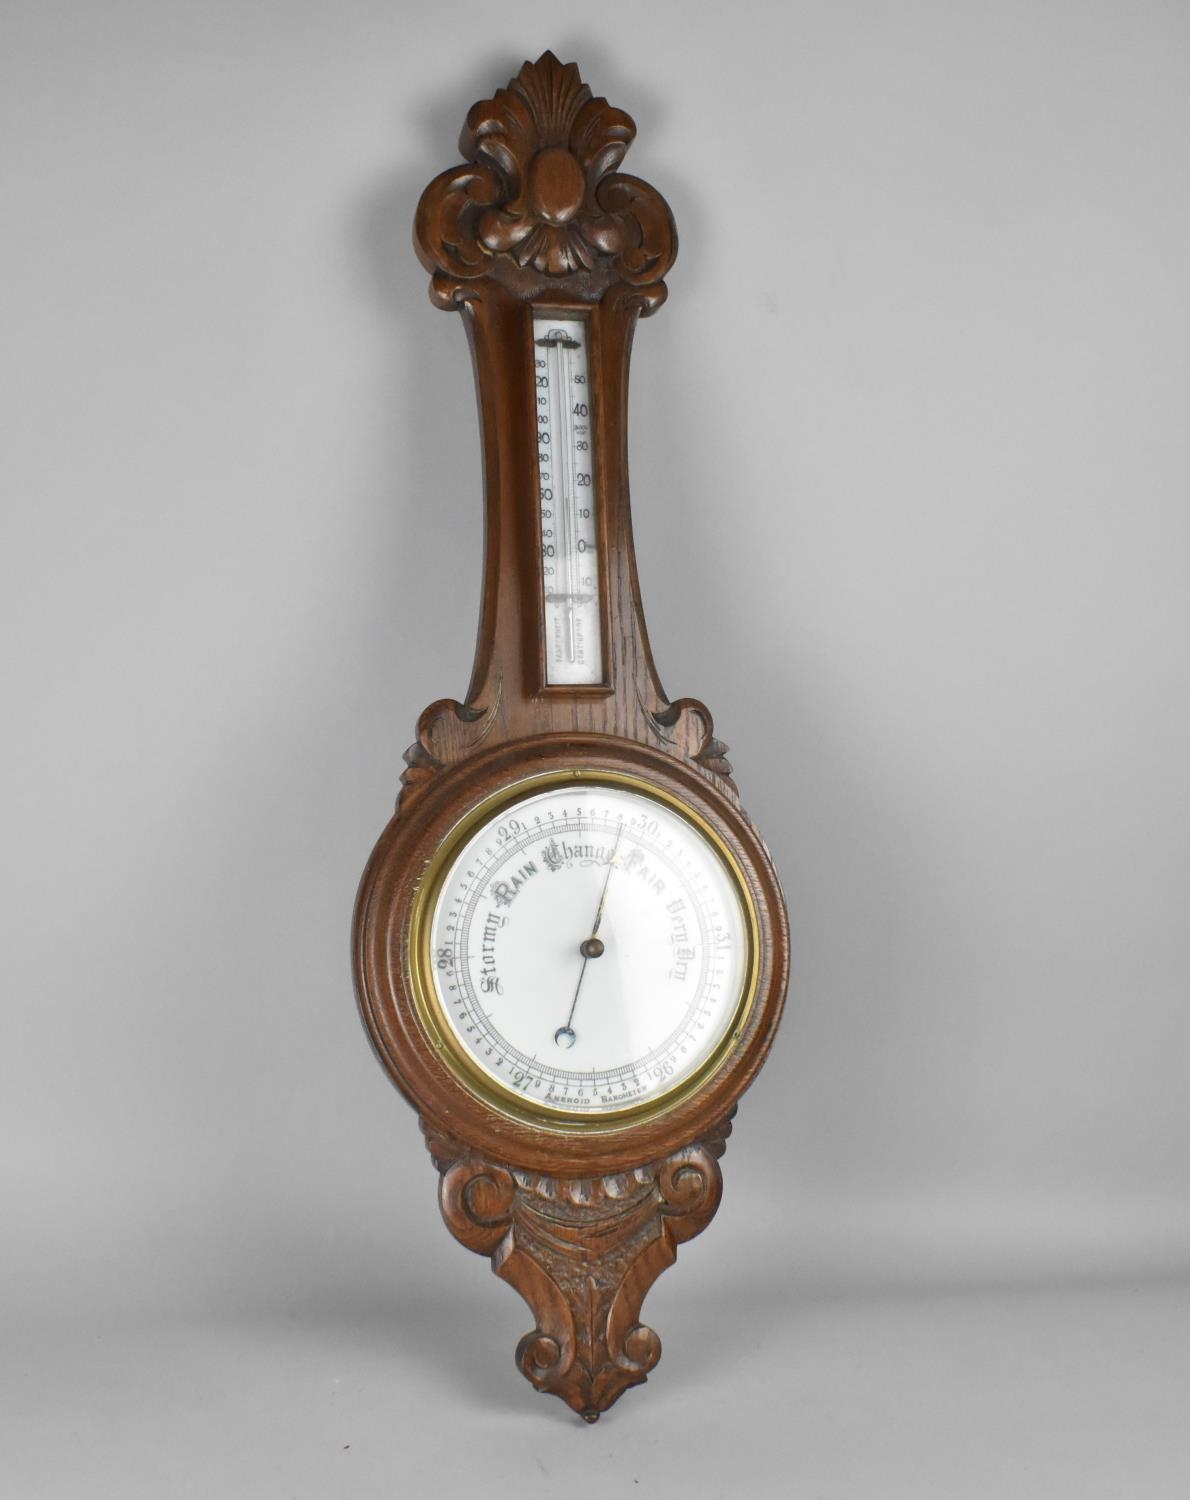 A Late Victorian/Edwardian Carved Oak Onion Topped Wheel Barometer with Thermometer